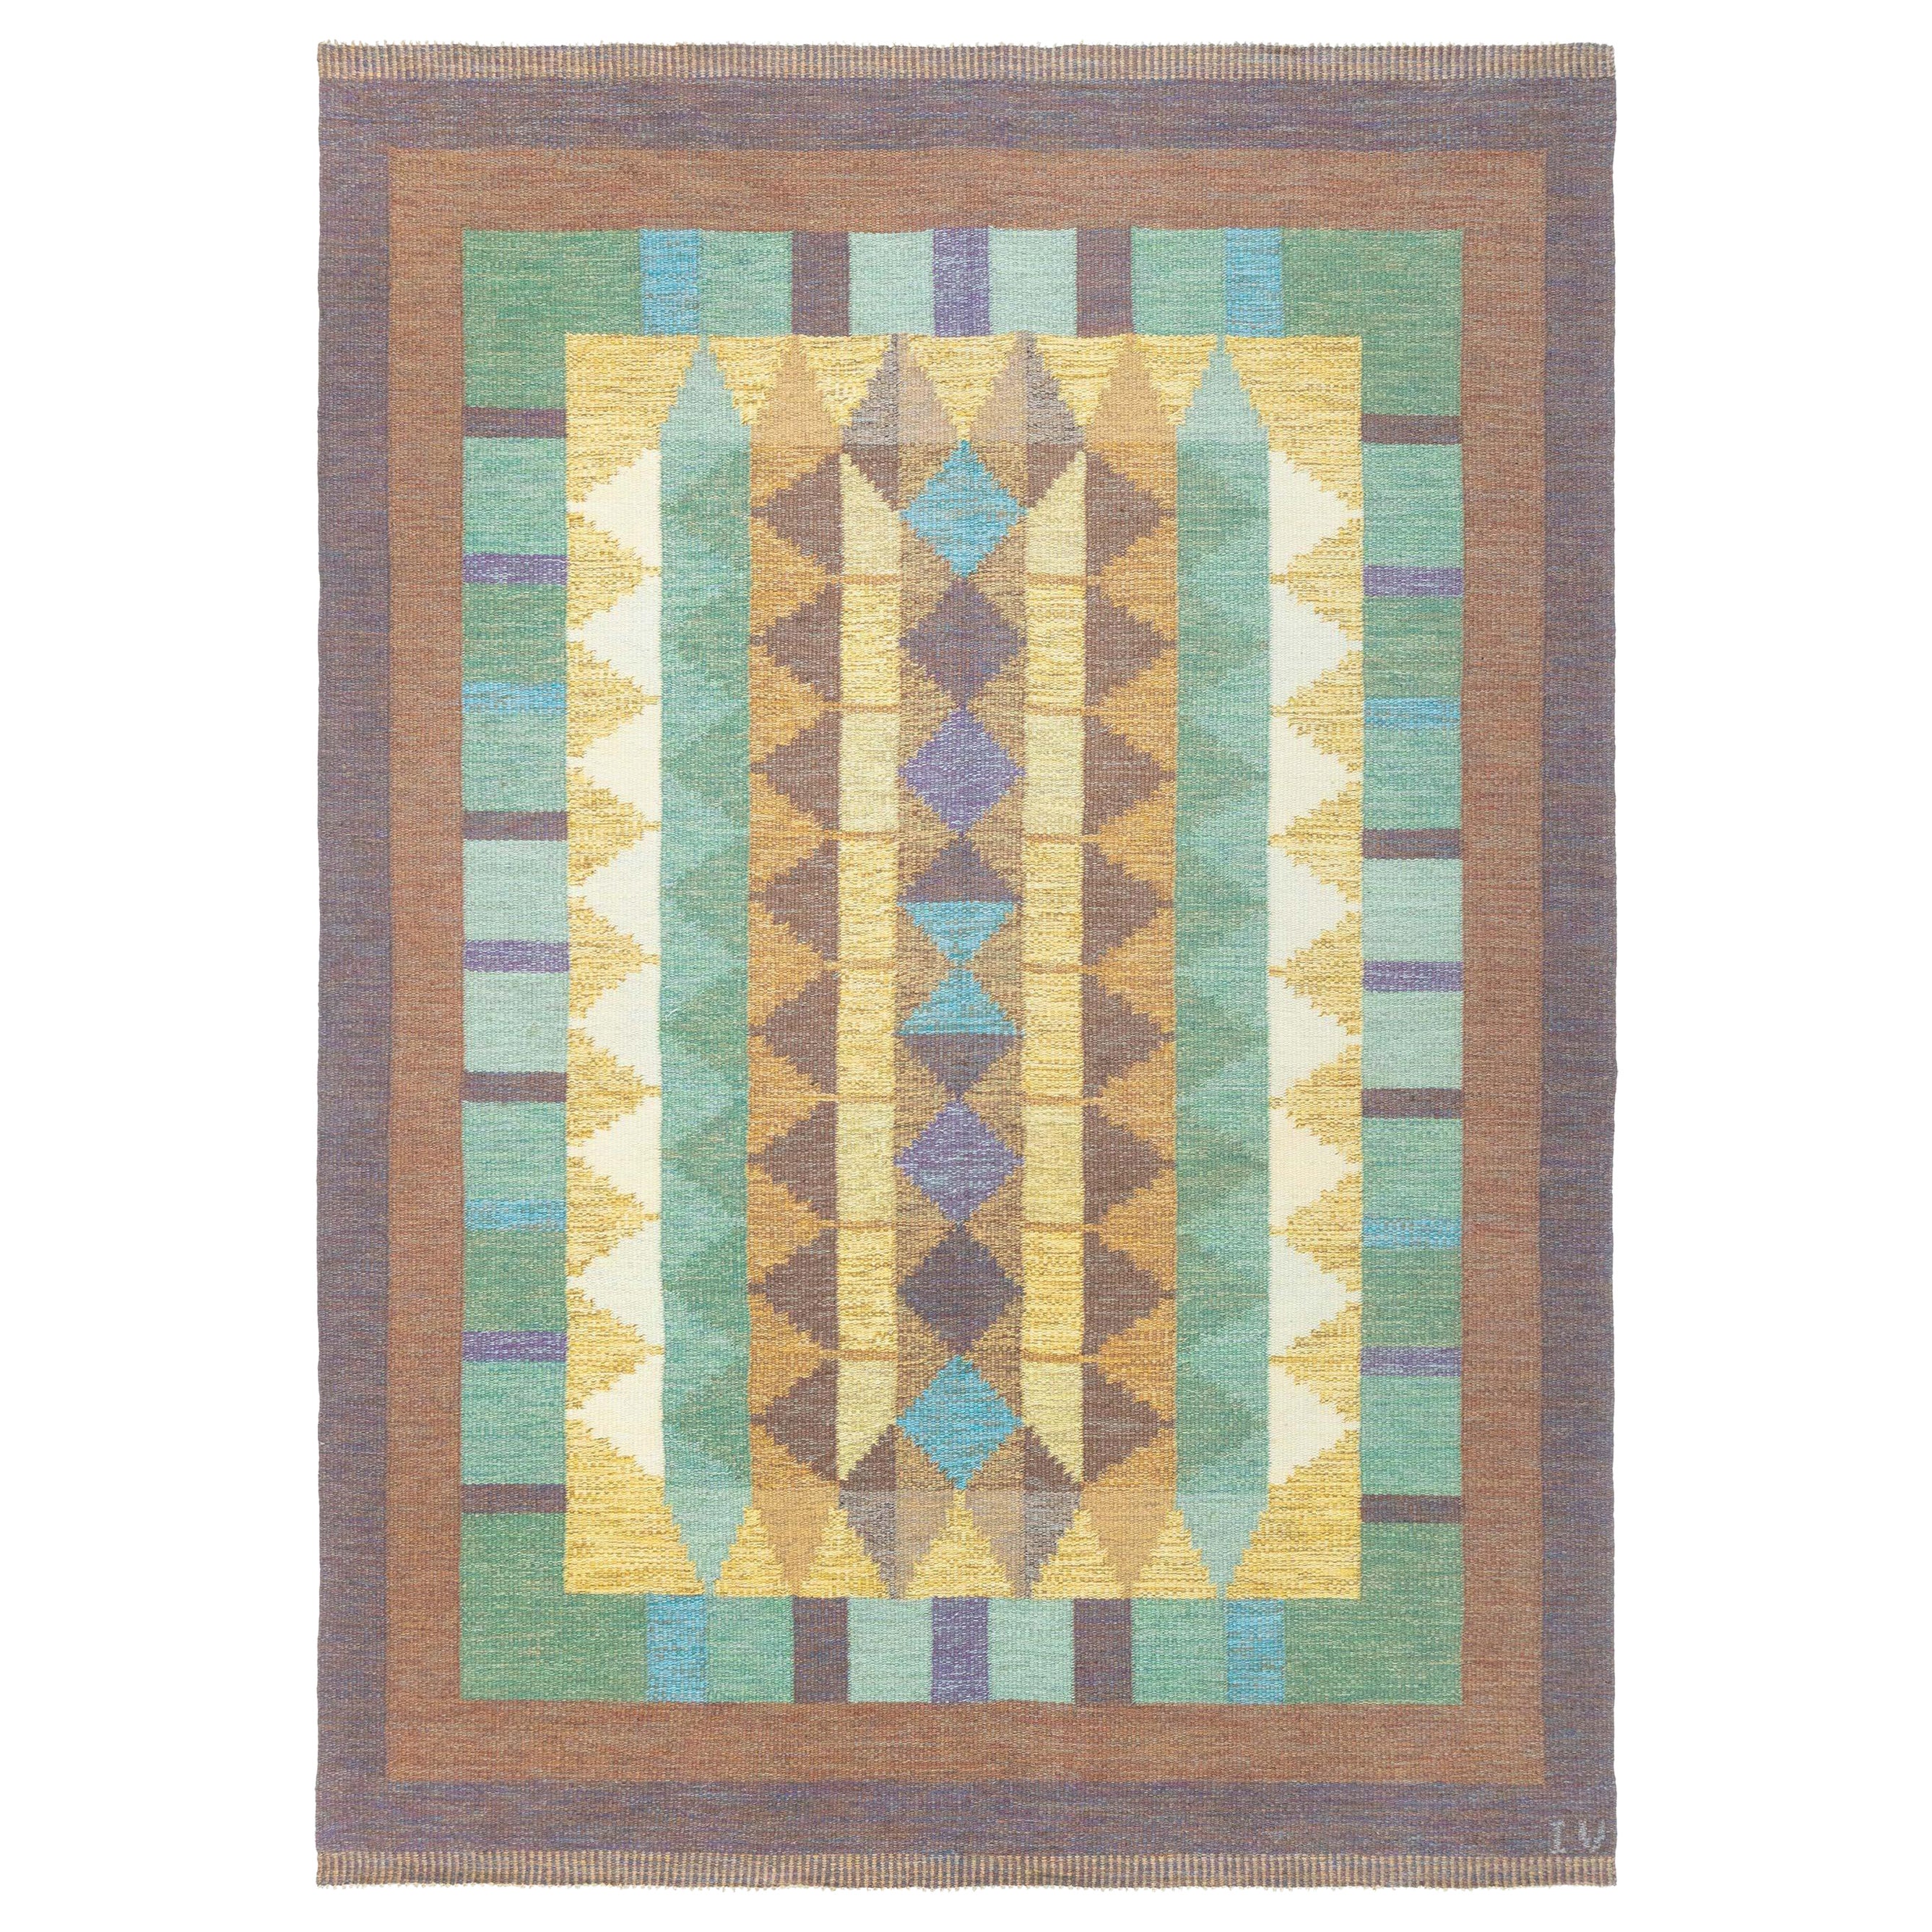 Vintage Swedish Flat Weave Rug Signed with Initials 'IV' For Sale